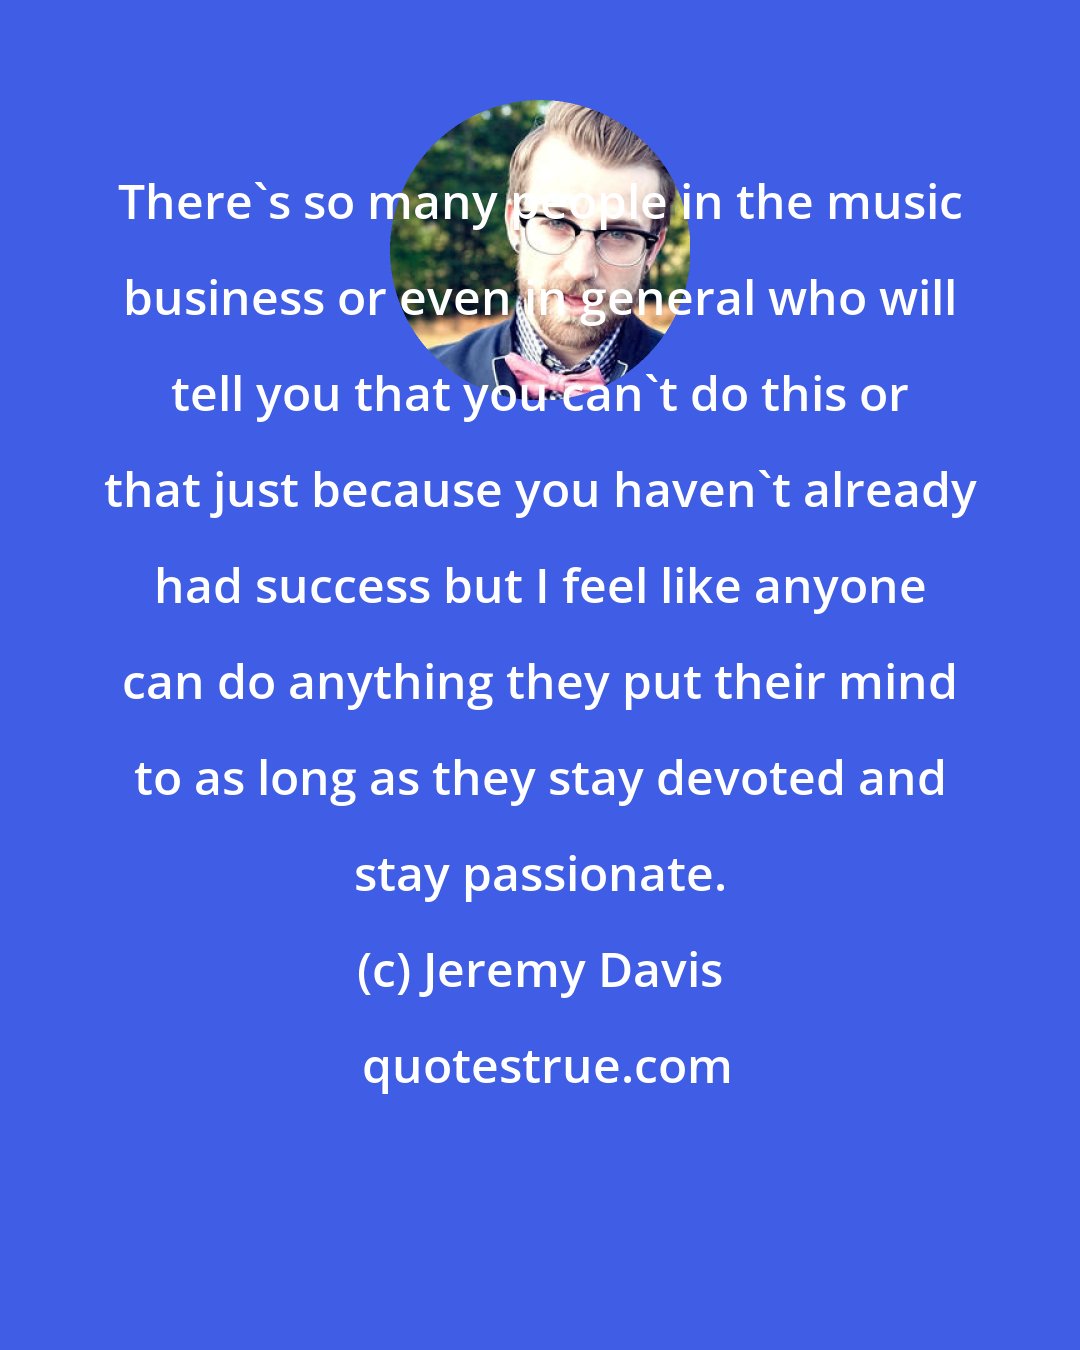 Jeremy Davis: There's so many people in the music business or even in general who will tell you that you can't do this or that just because you haven't already had success but I feel like anyone can do anything they put their mind to as long as they stay devoted and stay passionate.